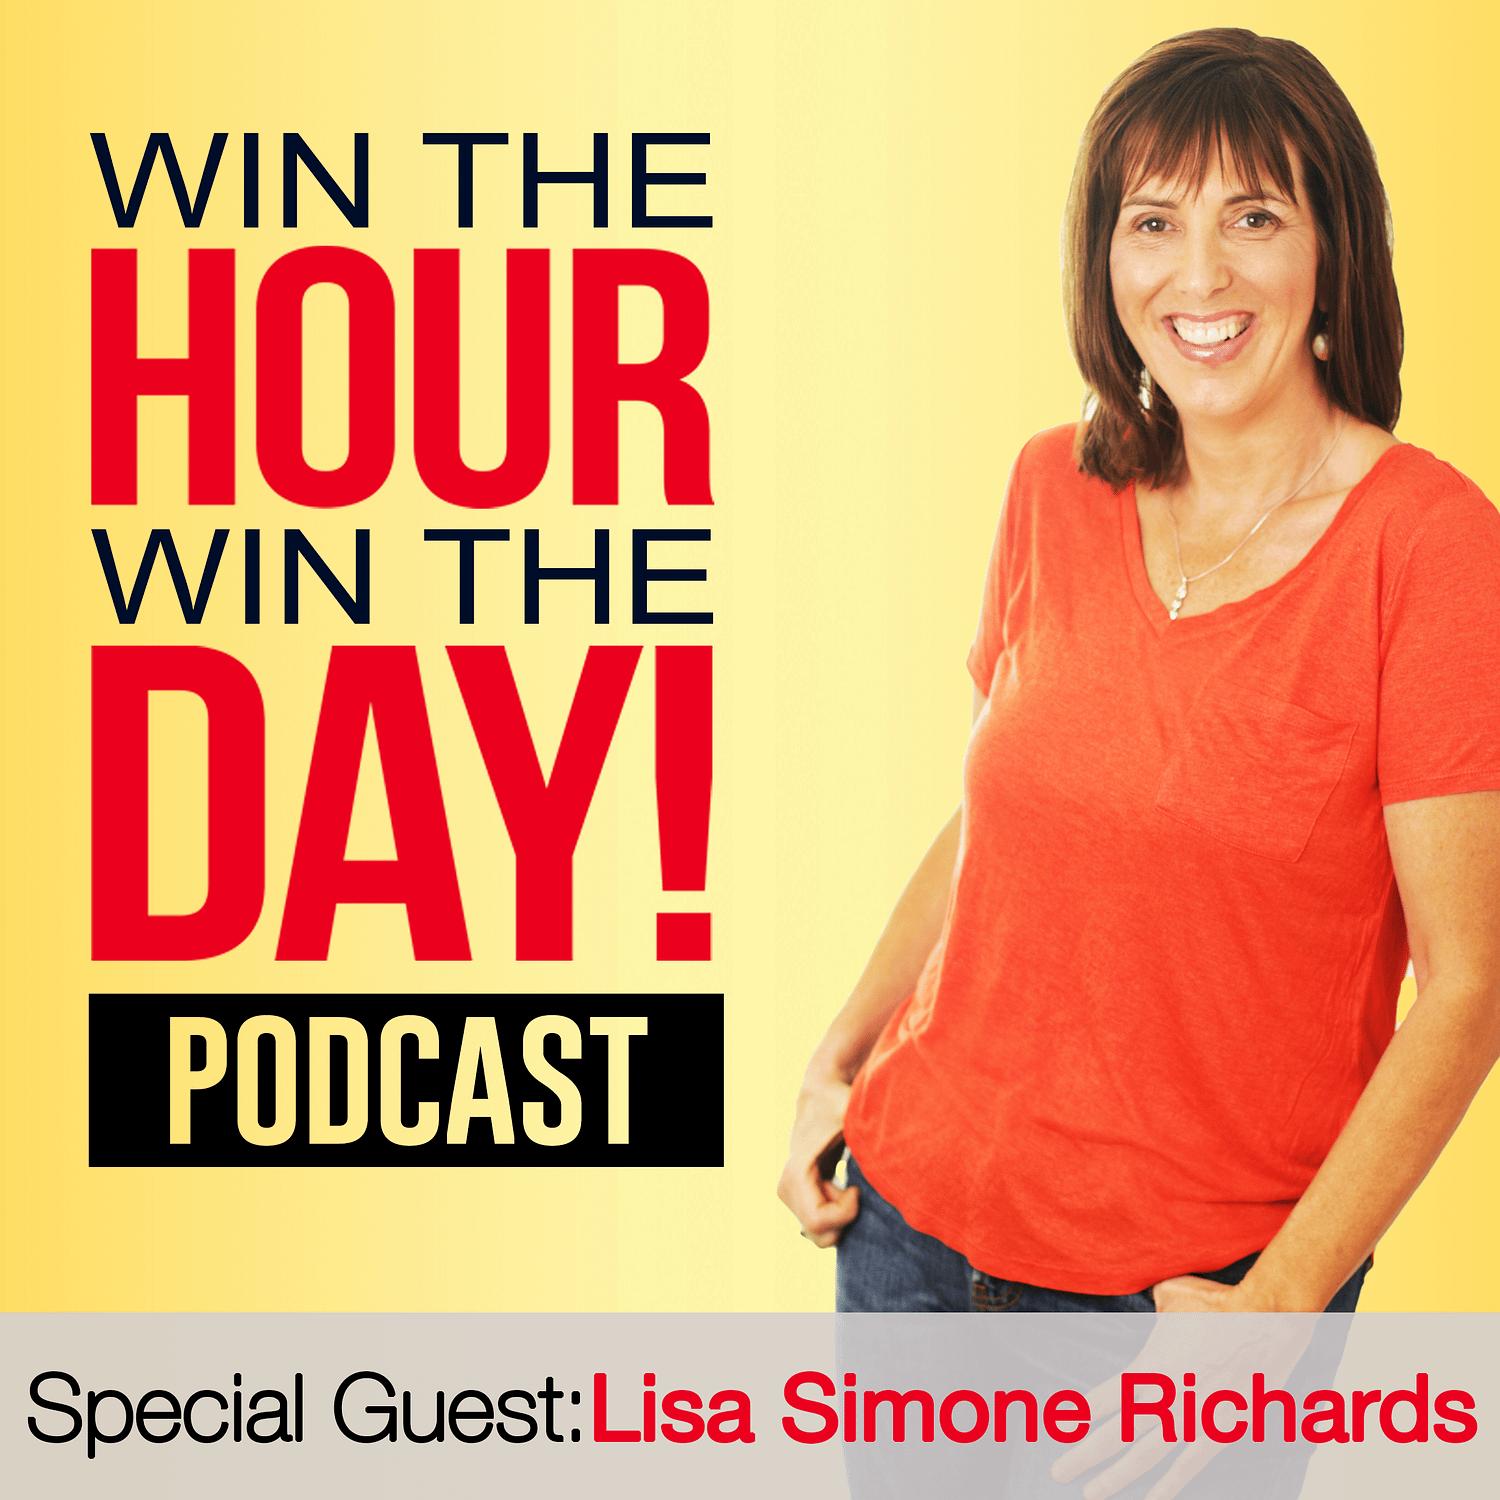 How To Get PR For Your Small Business! With Lisa Simone Richards